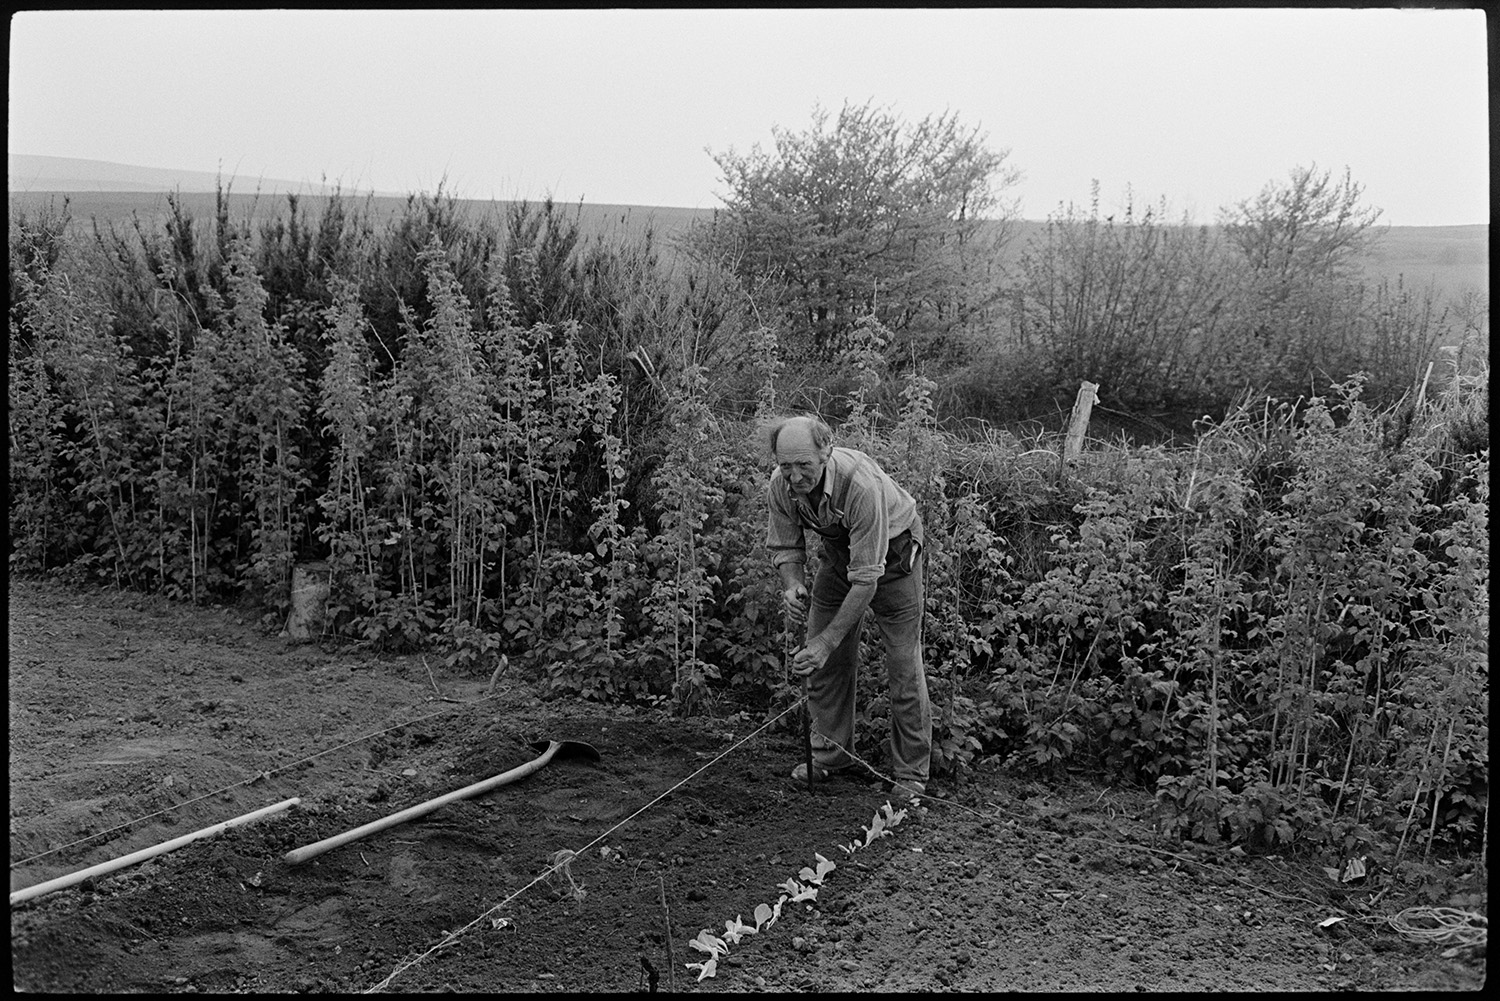 Farmer planting greens folk singer wearing dungarees. 
[A man using a piece of string and stake to plant a row of greens in a line in a vegetable garden at Exmoor Farm. A shovel is lying on the ground next to him. He is wearing dungarees and was a folk singer.]